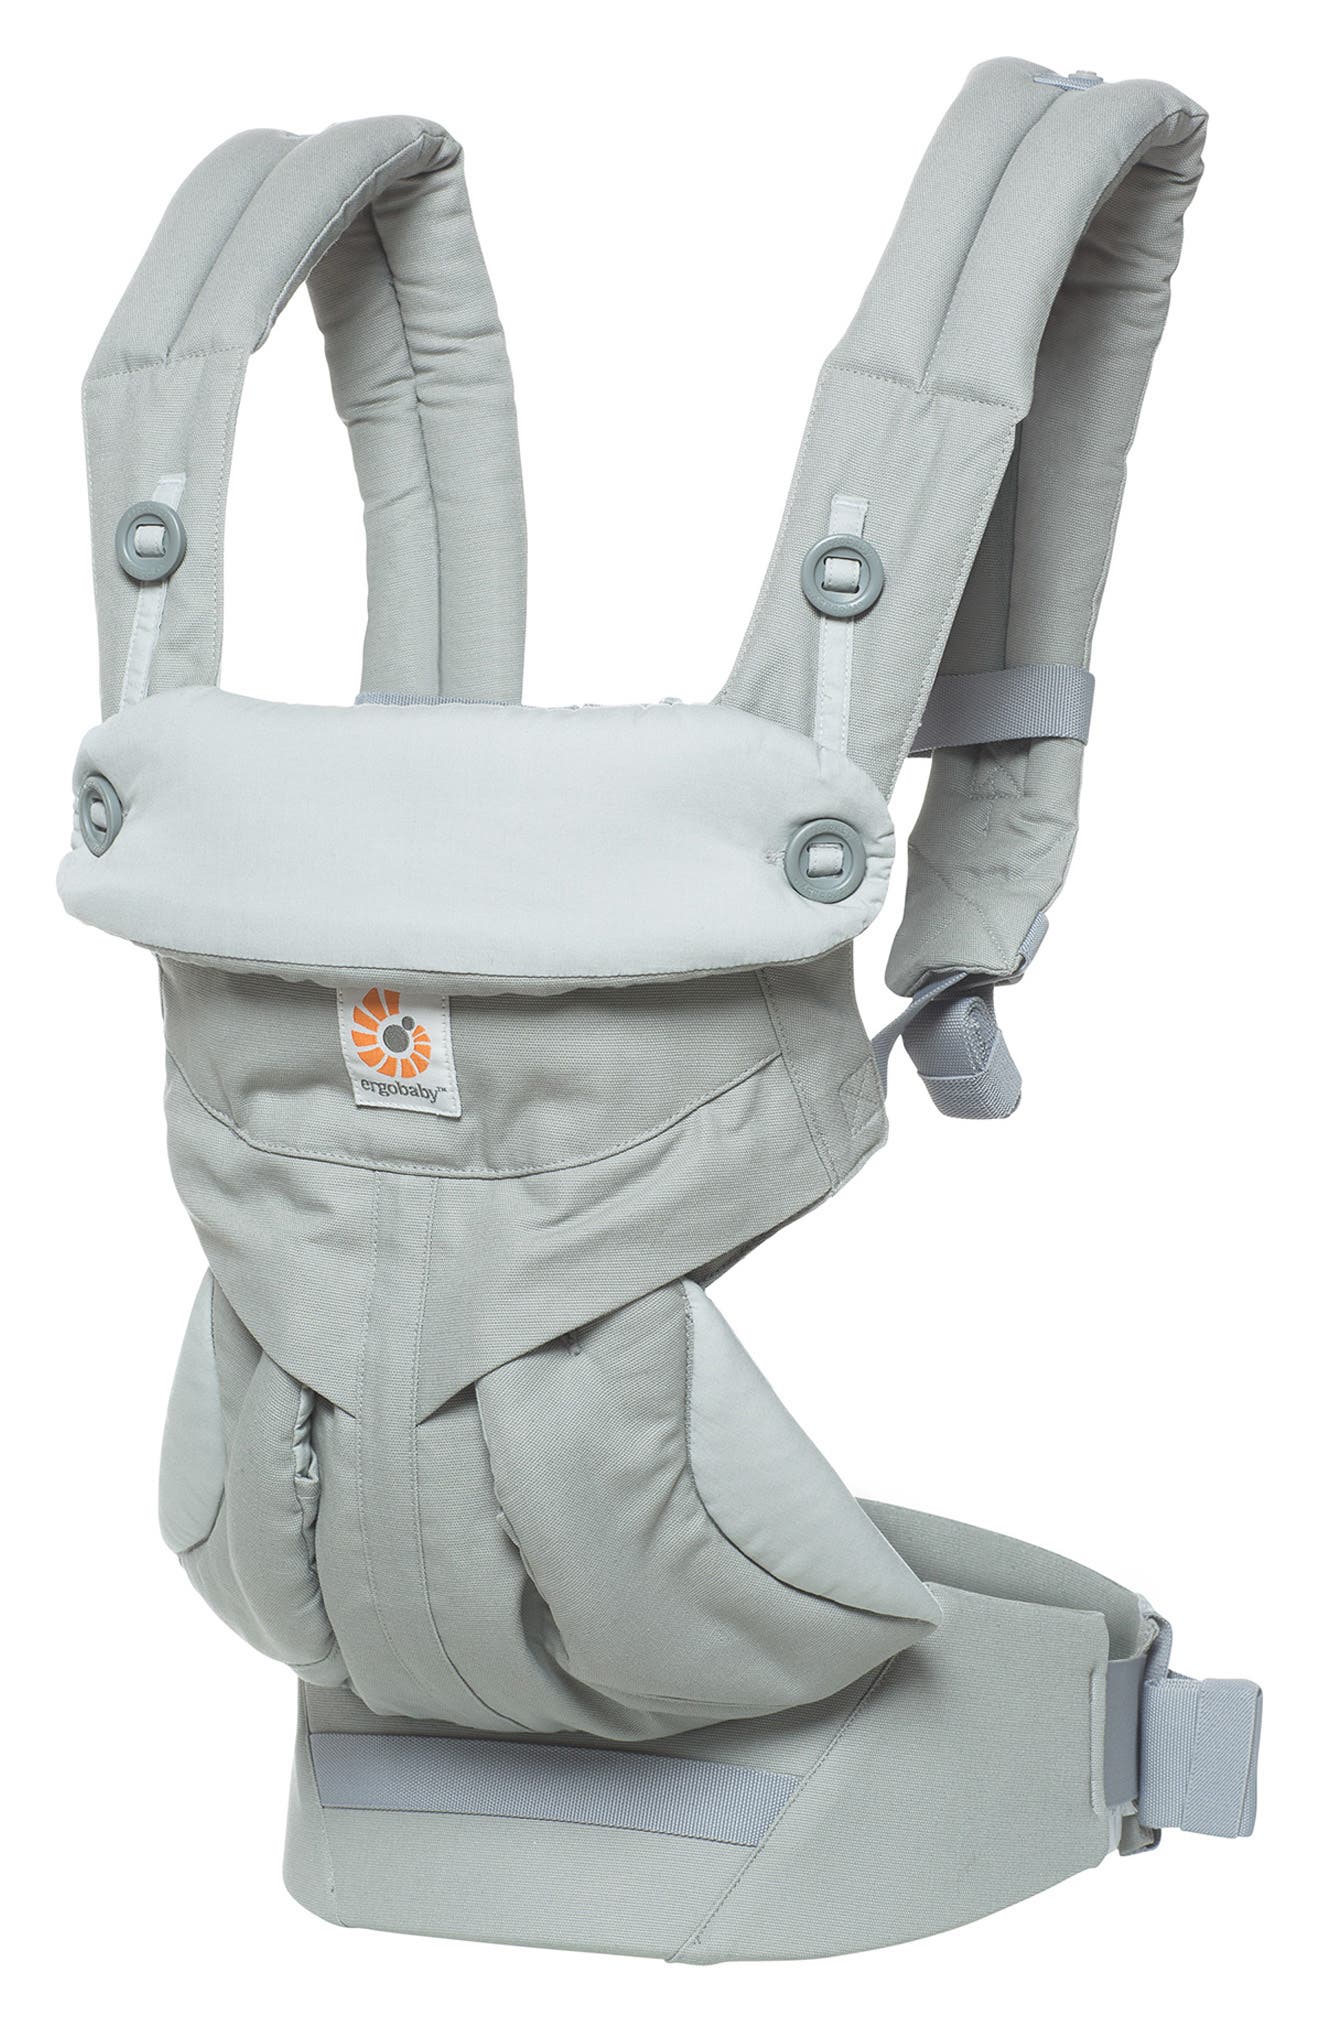 Ergobaby 360 All Positions Baby Carrier - Pearl Grey